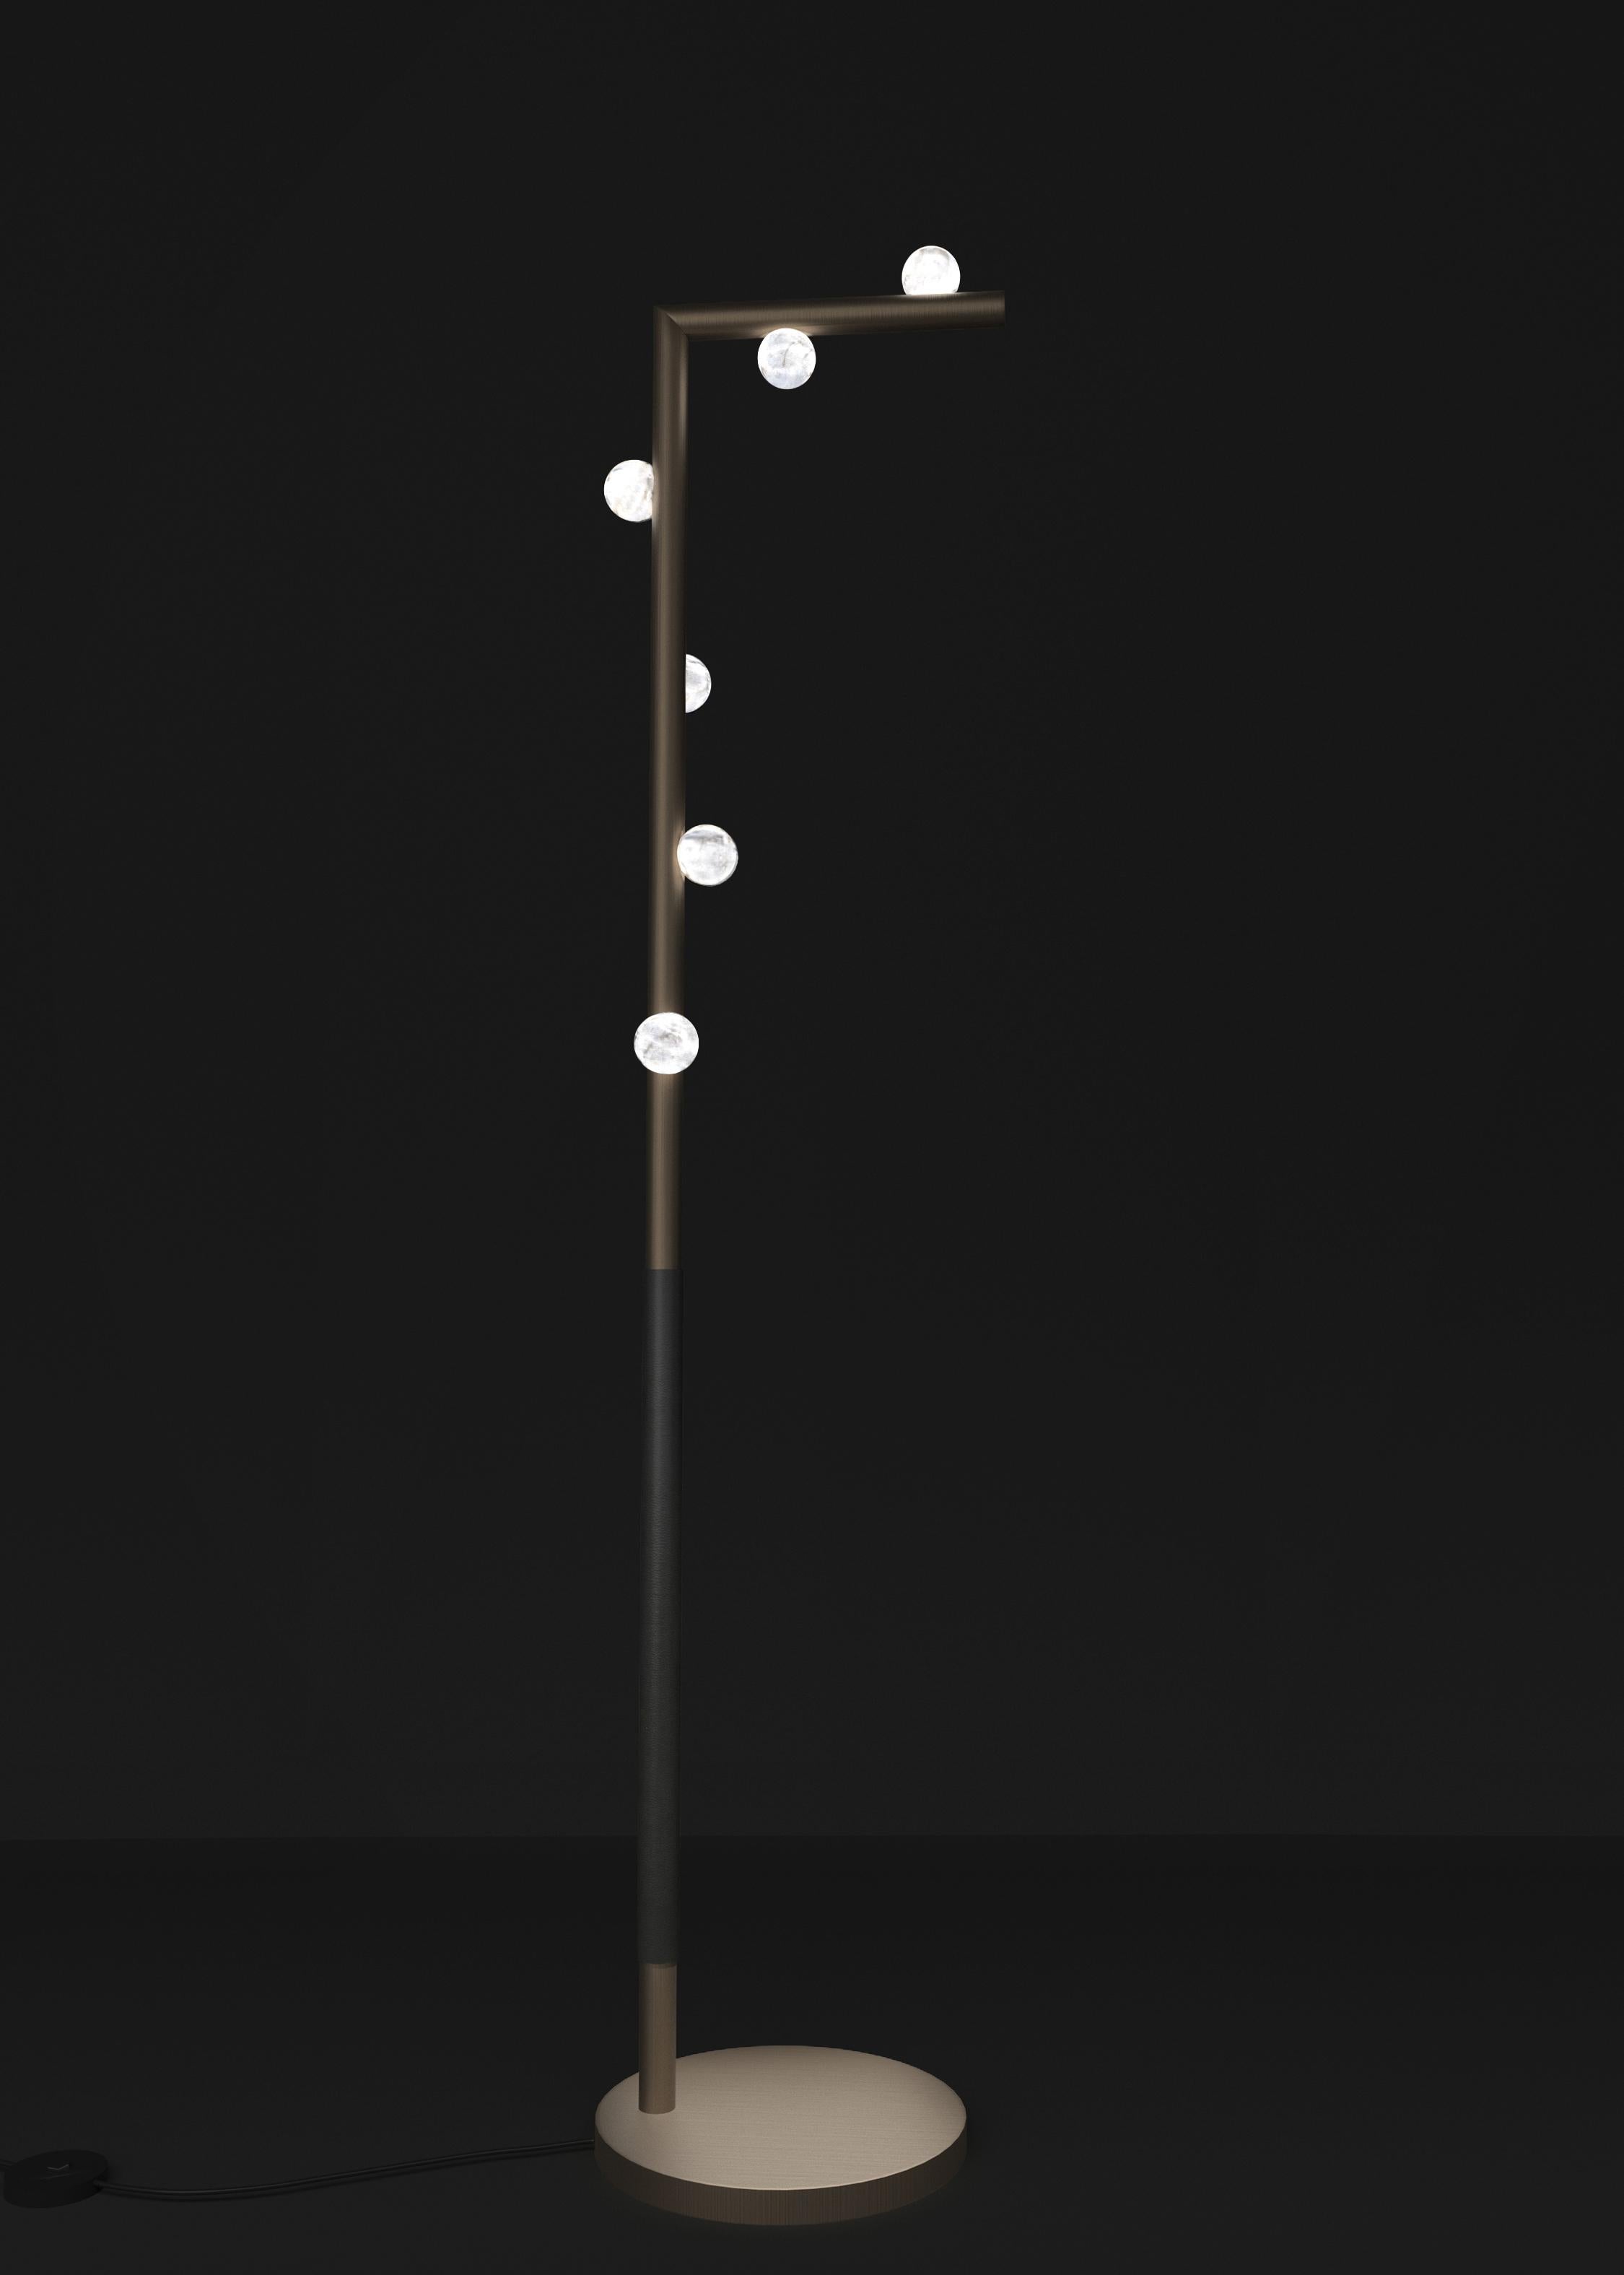 Demetra Brushed Burnished Metal Floor Lamp by Alabastro Italiano
Dimensions: D 30 x W 37 x H 158 cm.
Materials: White alabaster, metal and leather.

Available in different finishes: Shiny Silver, Bronze, Brushed Brass, Ruggine of Florence, Brushed